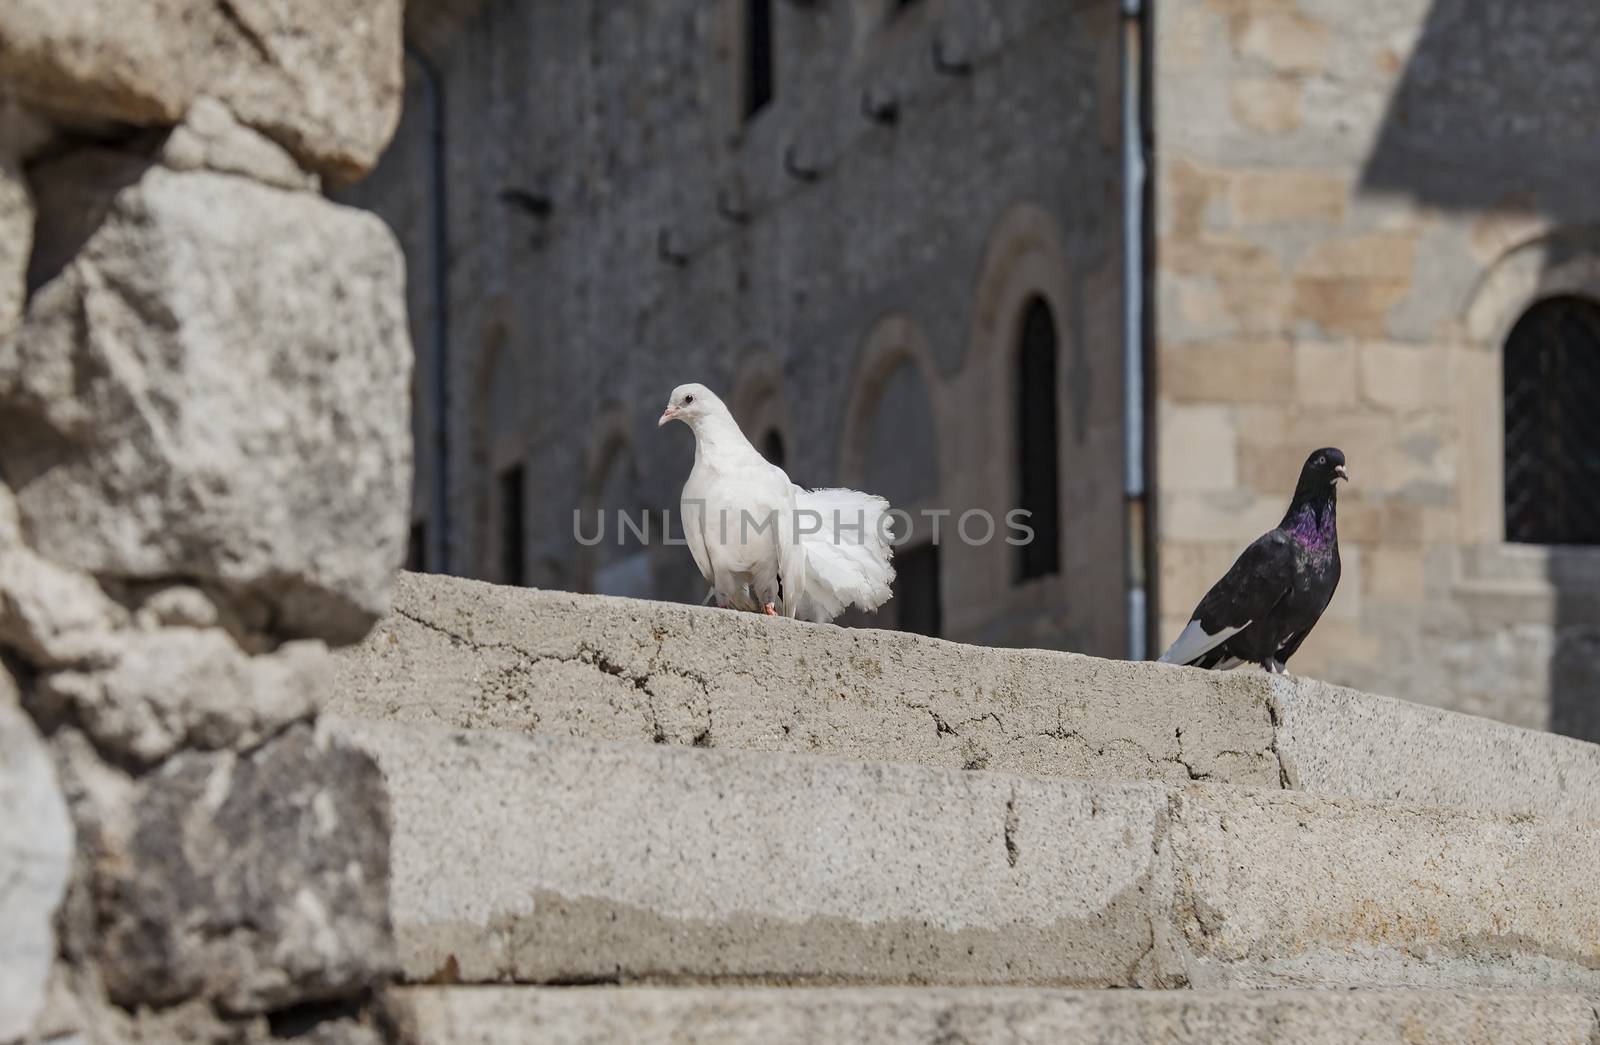 White and black pigeons on stairs in front of a massive building in the background.